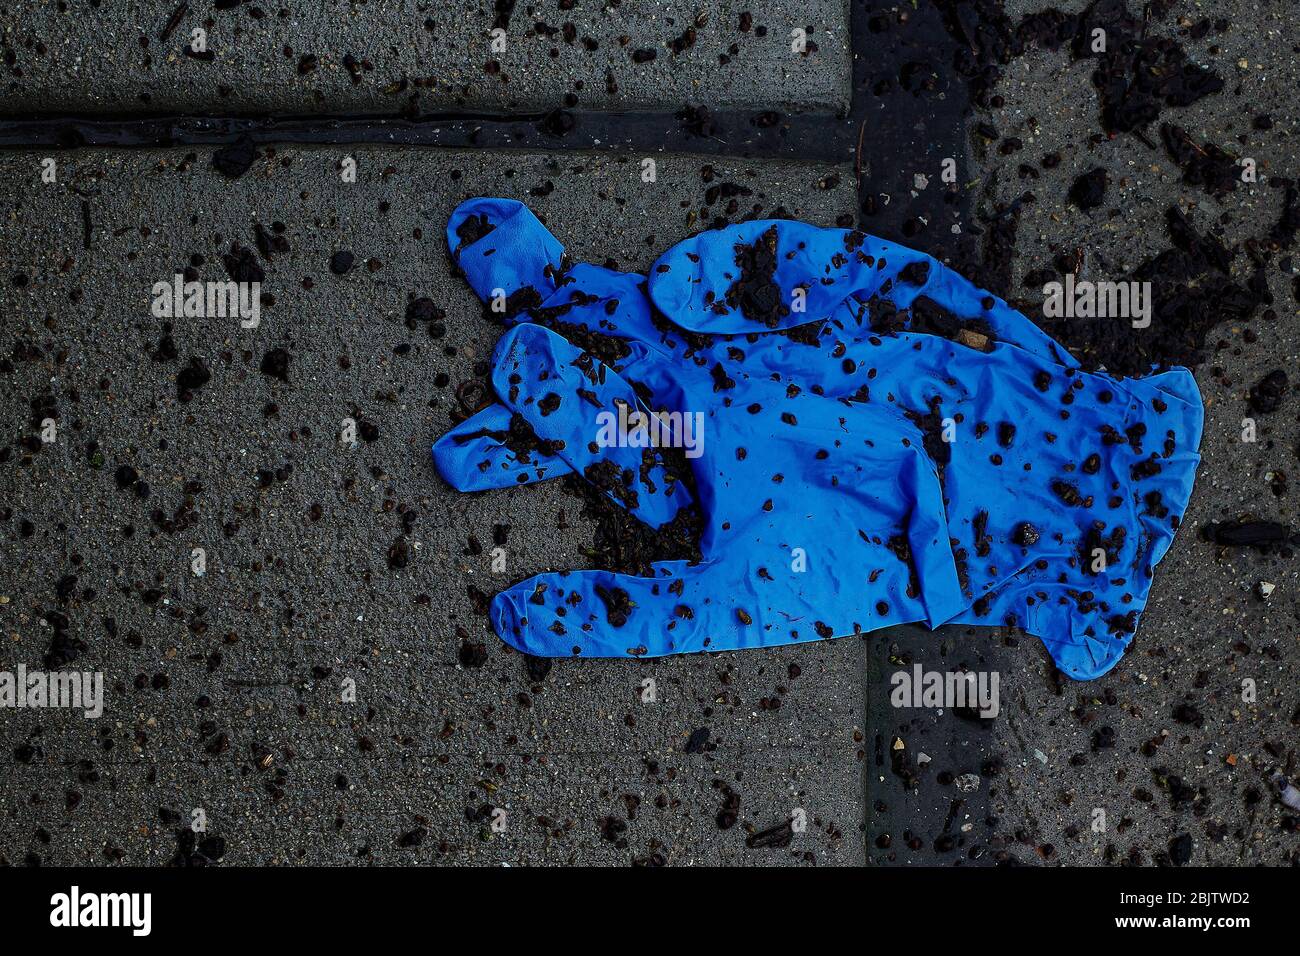 looking down at discarded blue latex glove with fingers crossed, on the sidewalk Stock Photo